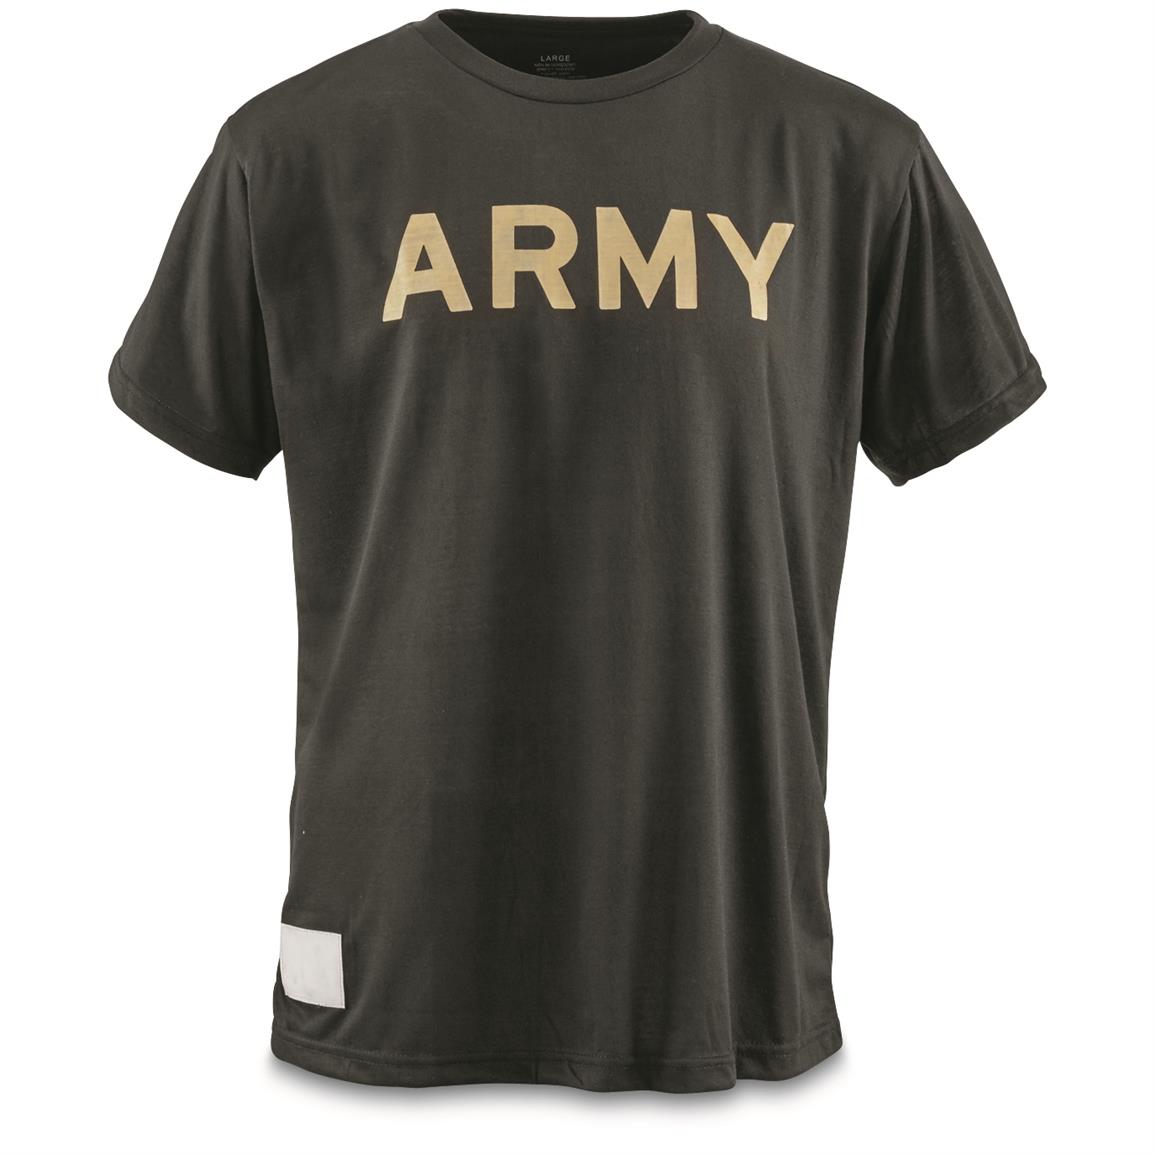 Army Infantry Shirts - Army Military